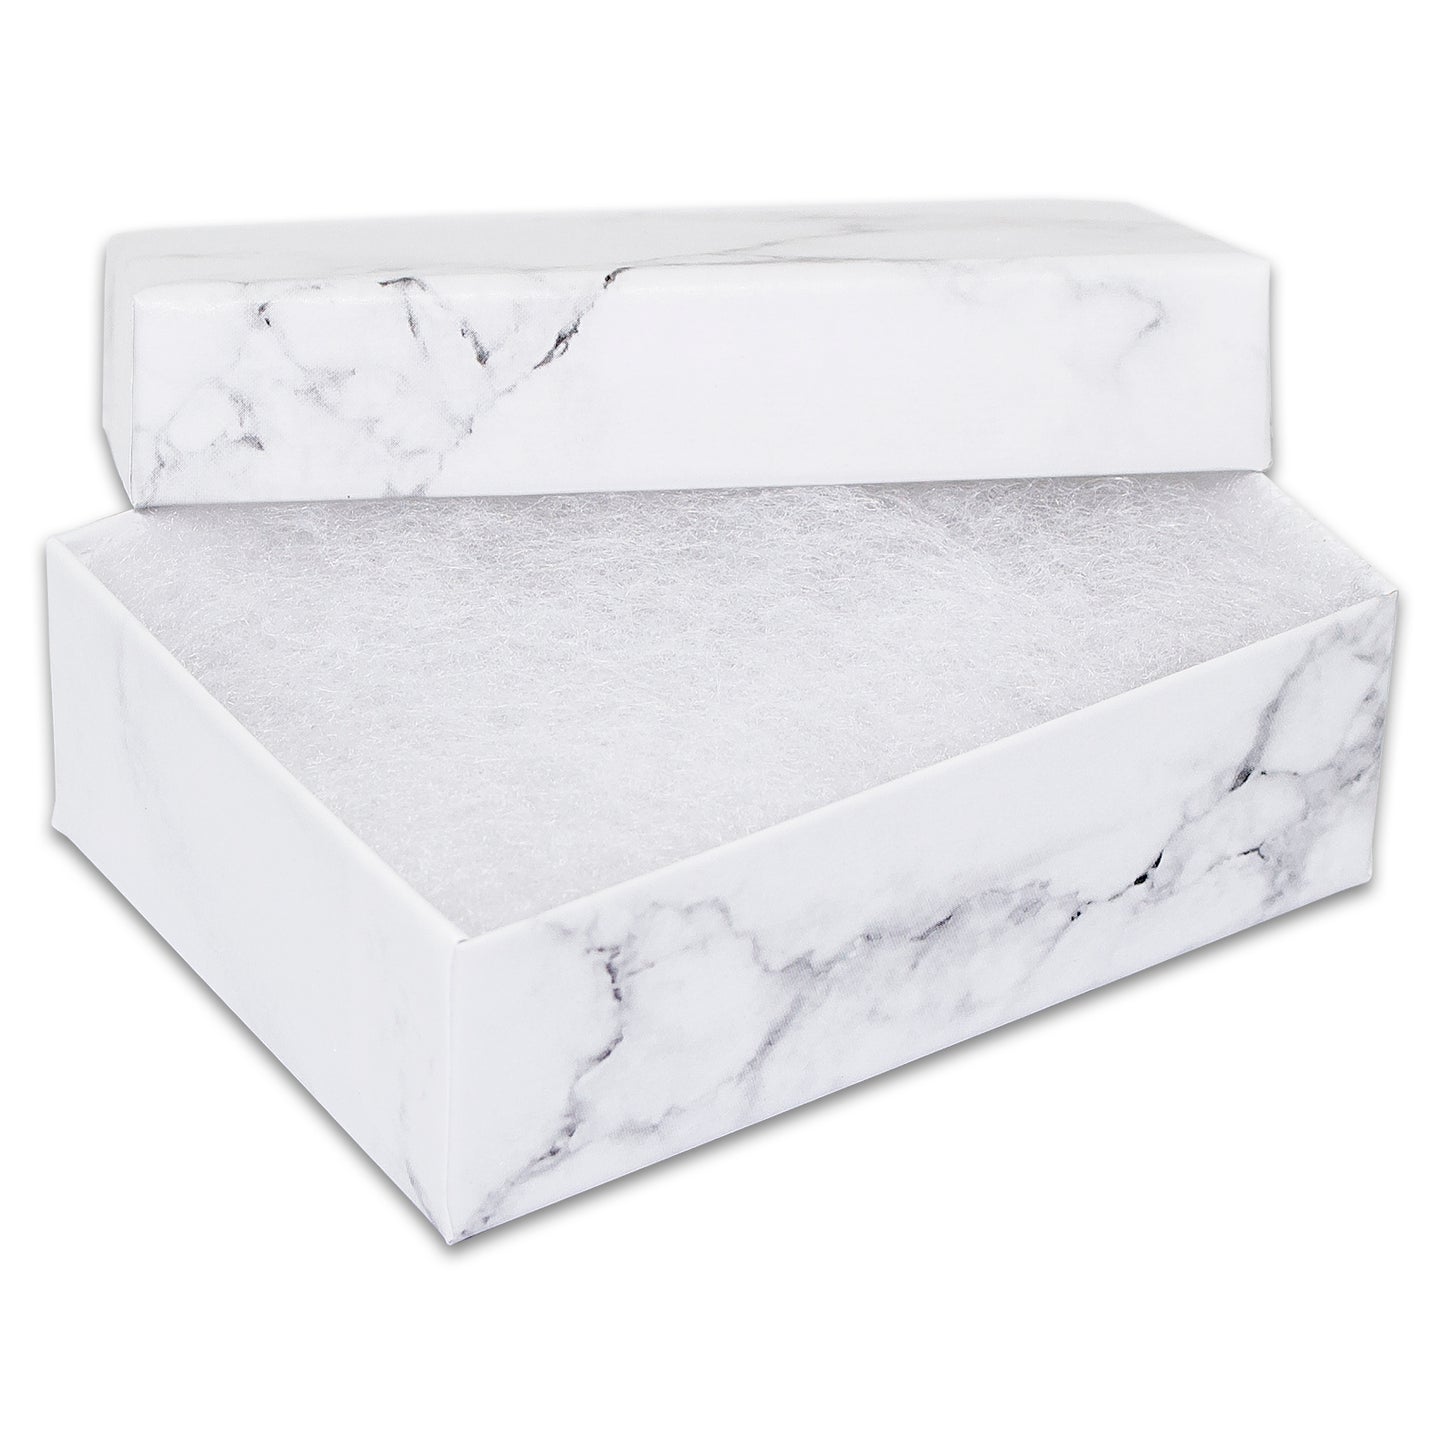 3 1/4" x 2 1/4" x 1" Marble White Cotton Filled Paper Box